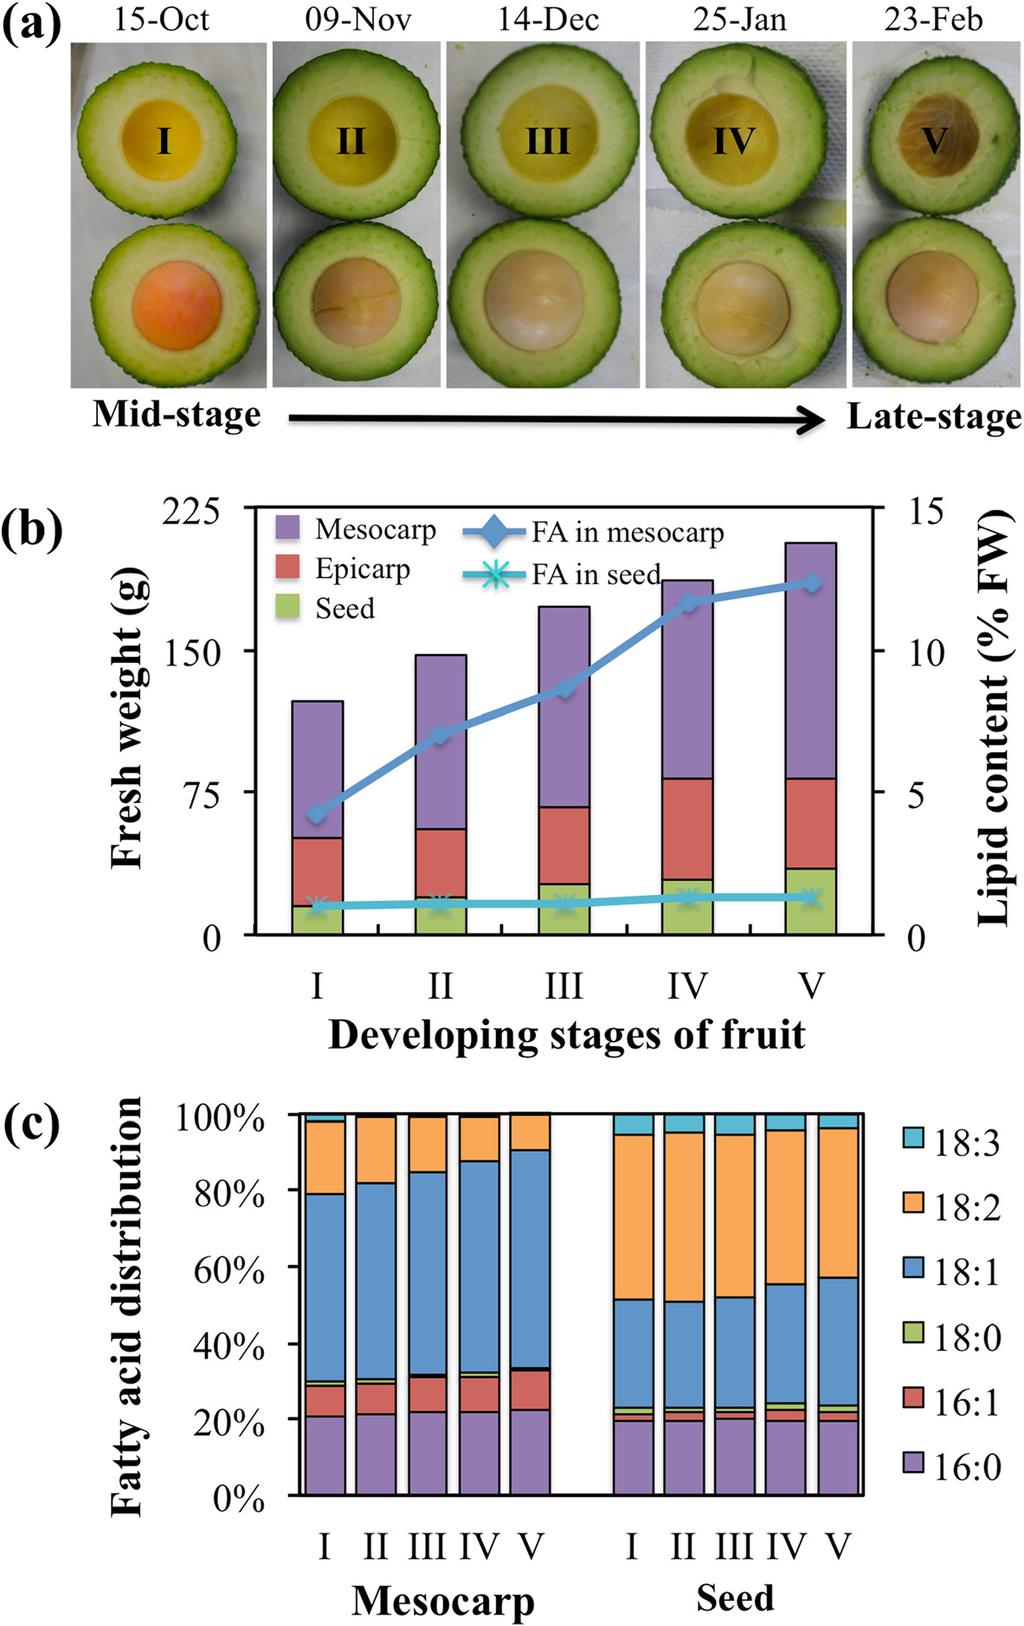 Kilaru et al. BMC Plant Biology (2015) 15:203 Page 4 of 18 Fig. 1 Lipid content and composition of developing fruits of avocado.